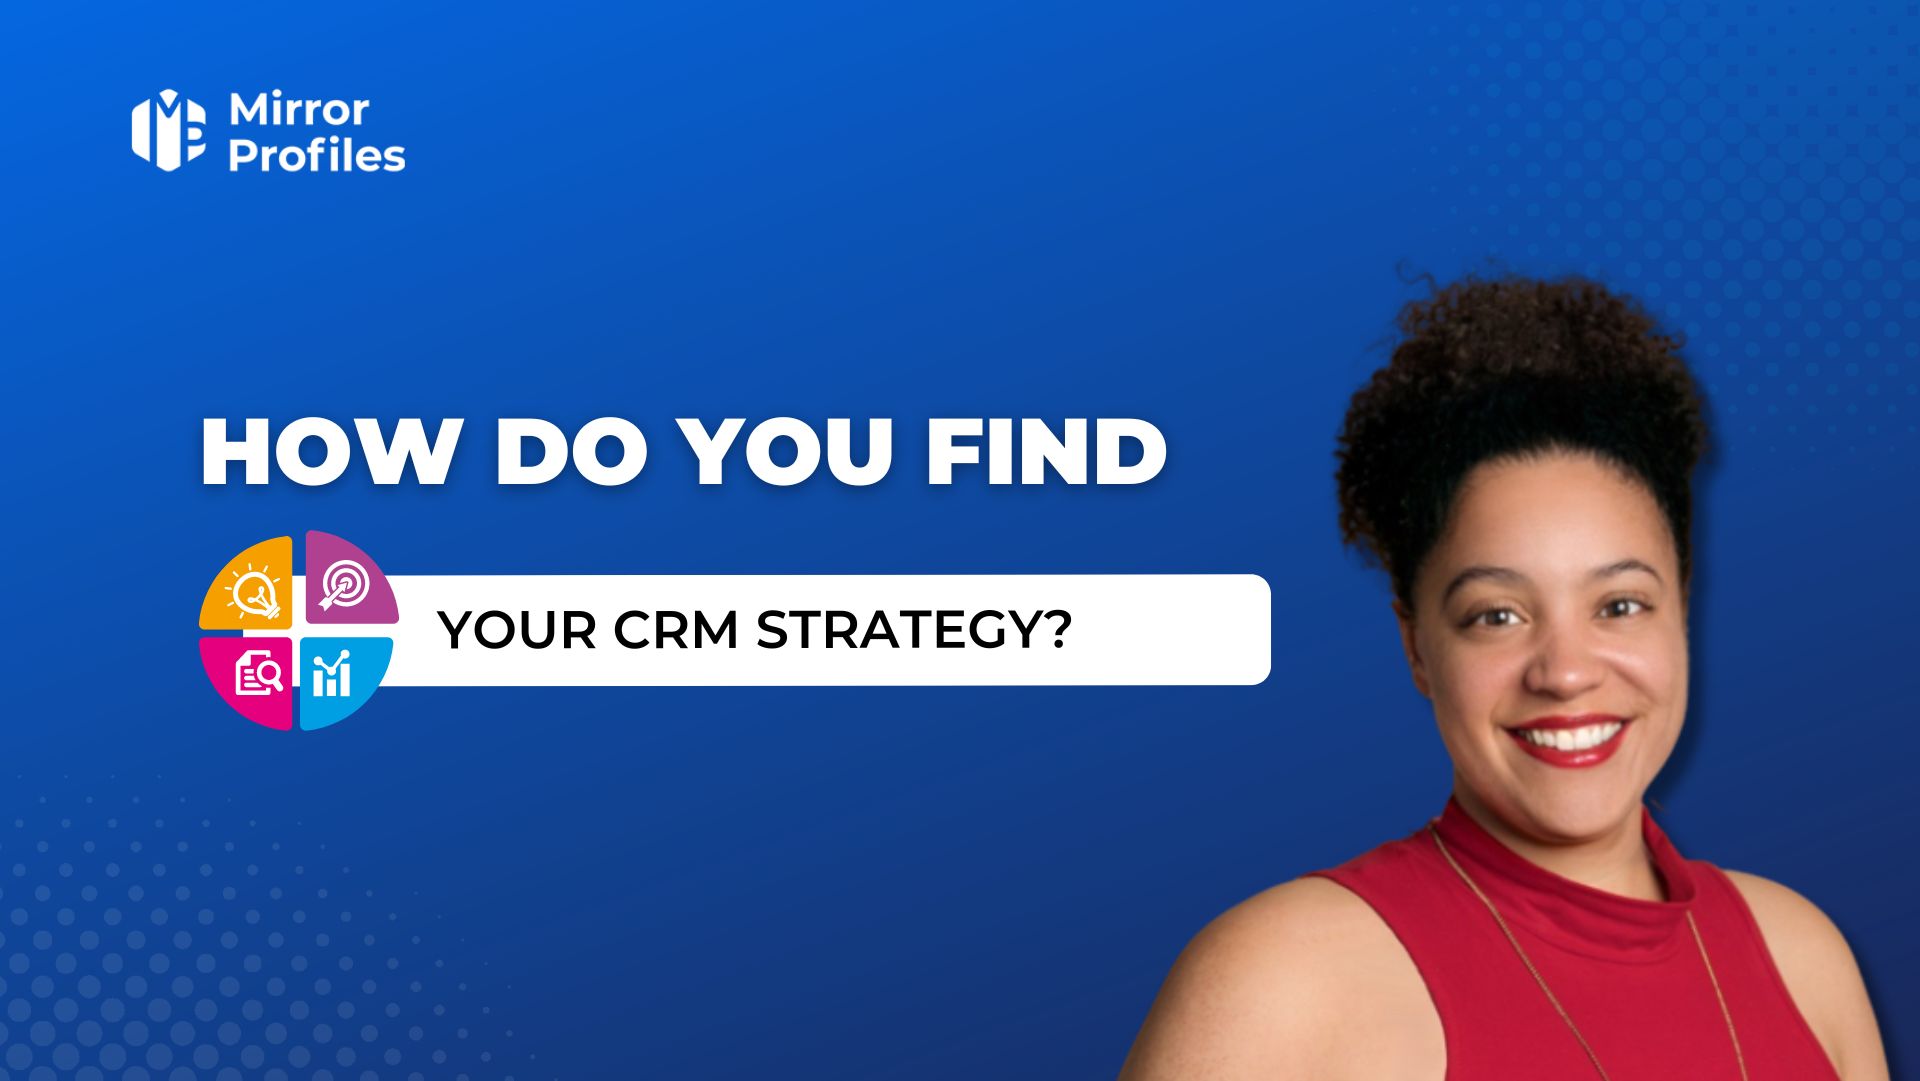 How do you find your CRM strategy?